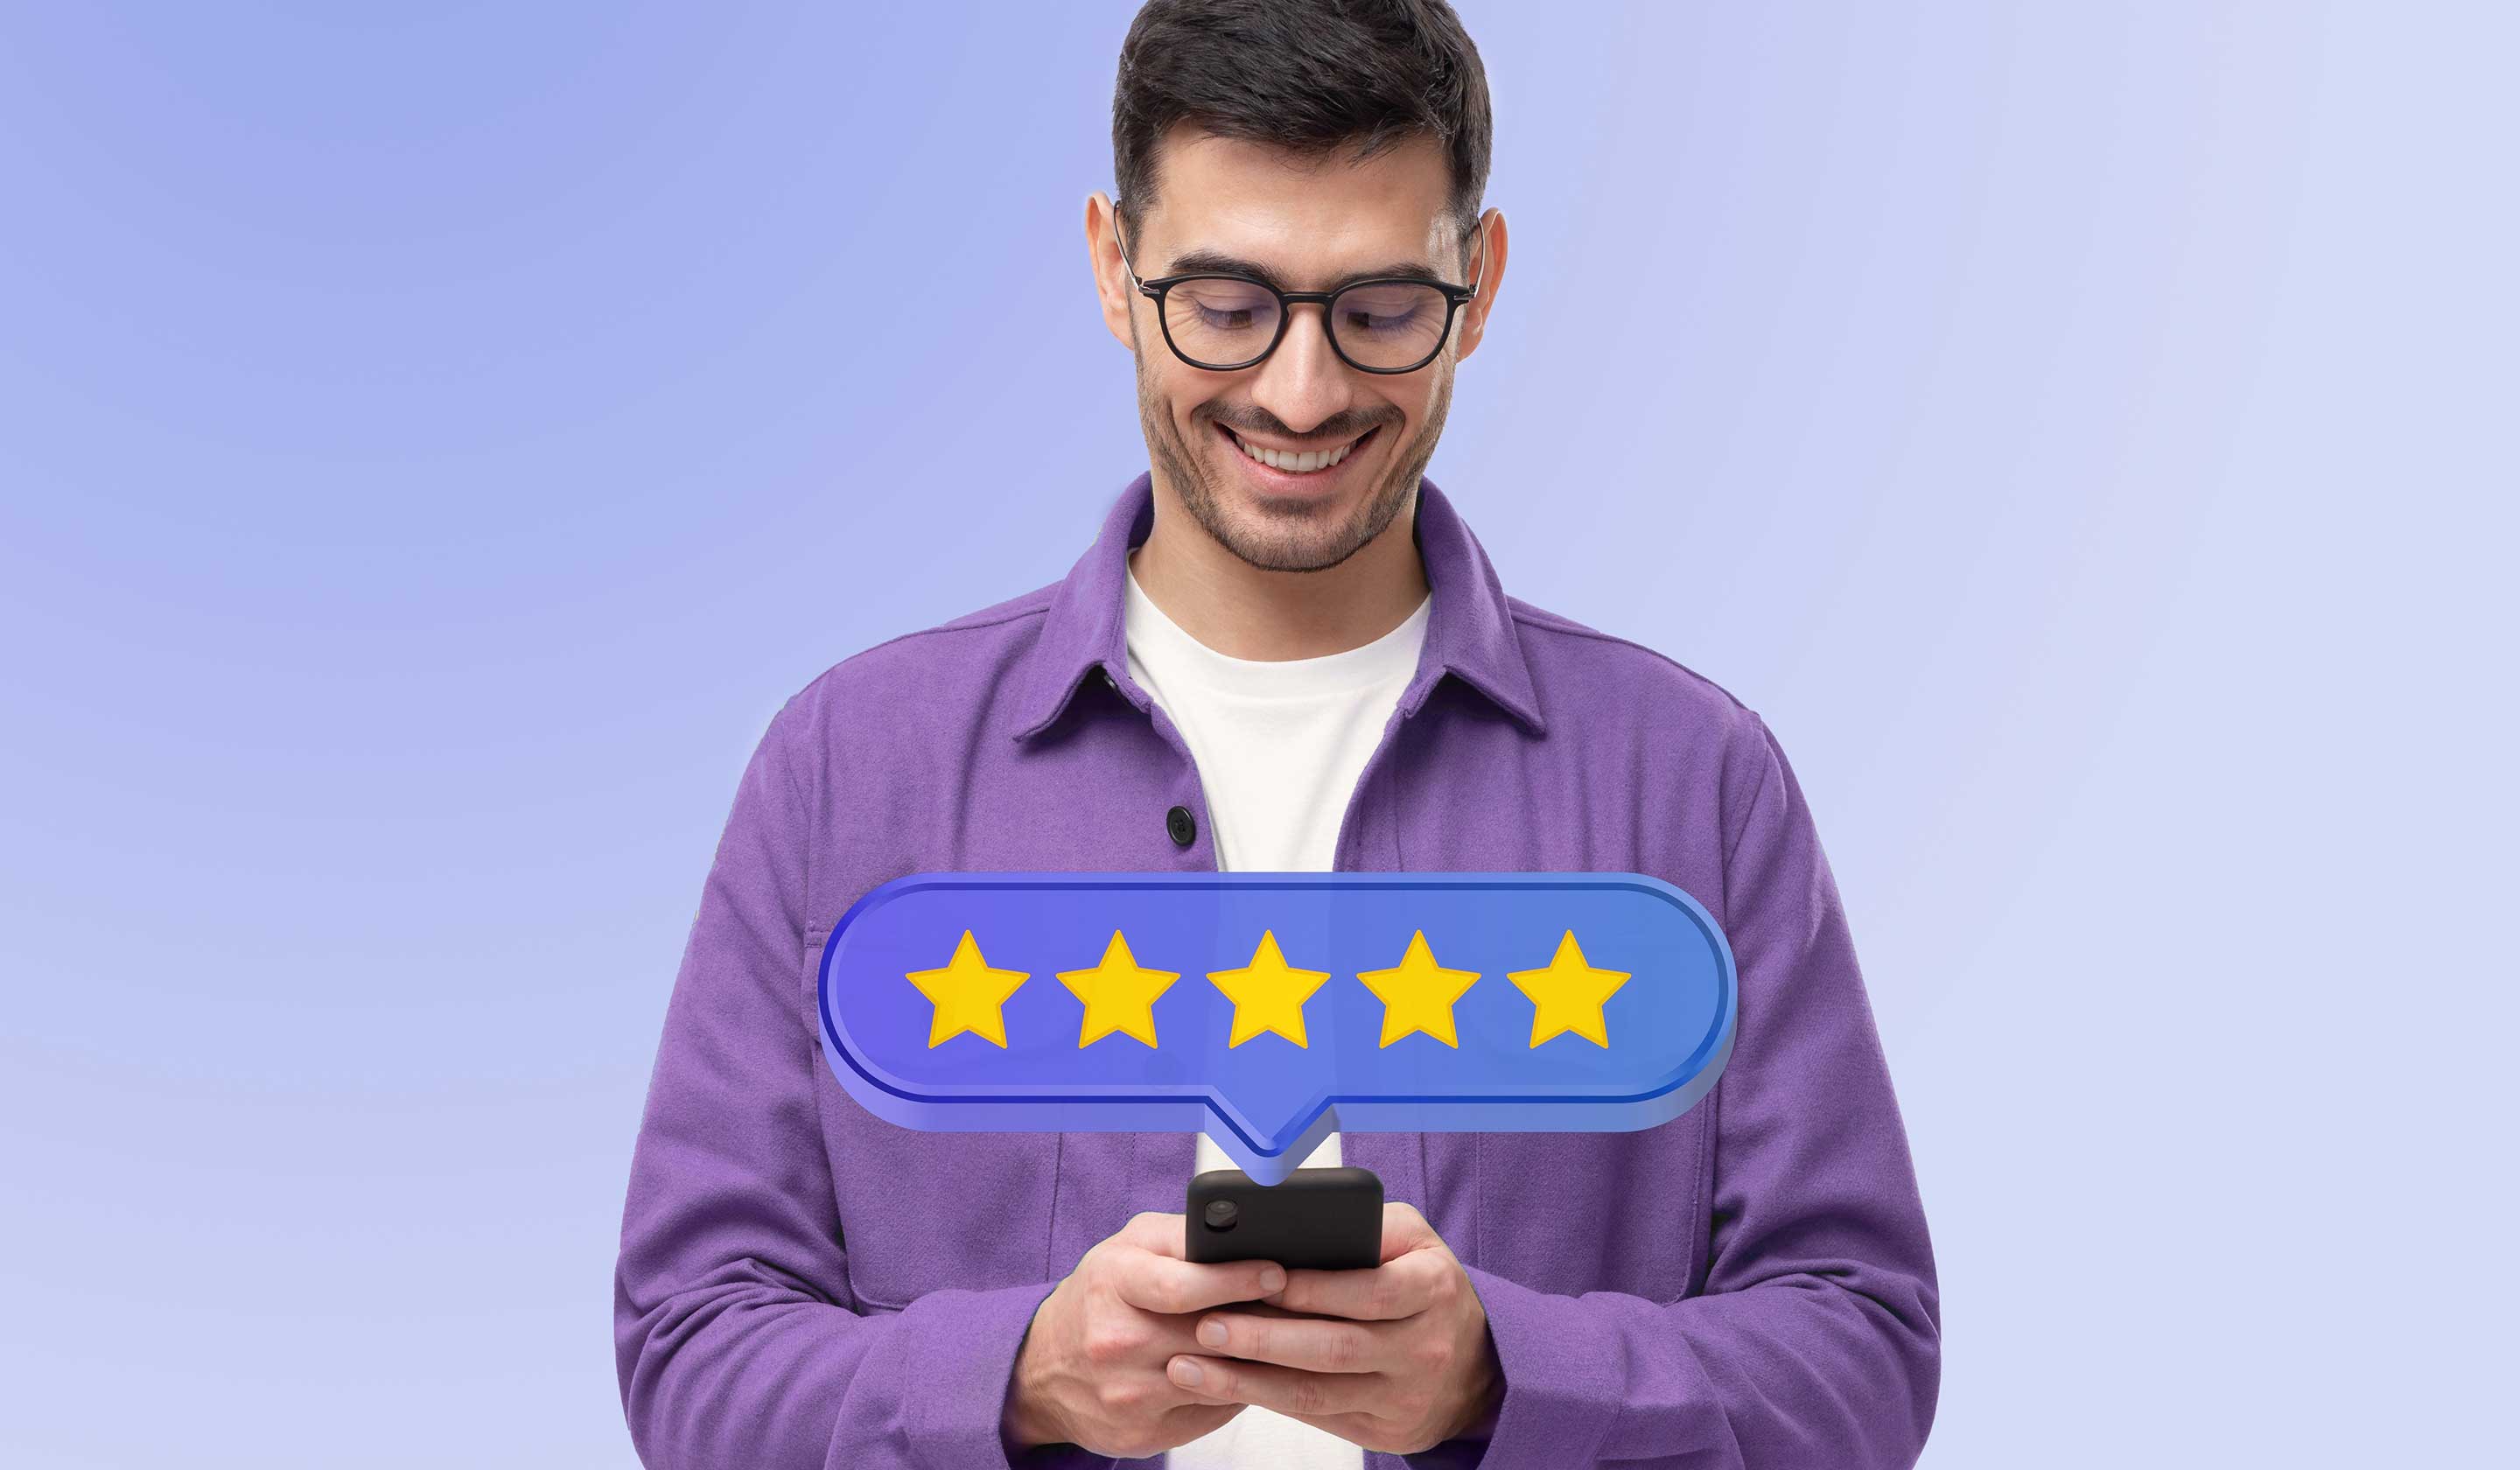 Top 10 ways your PBM isn’t aligned with 5-star ratings